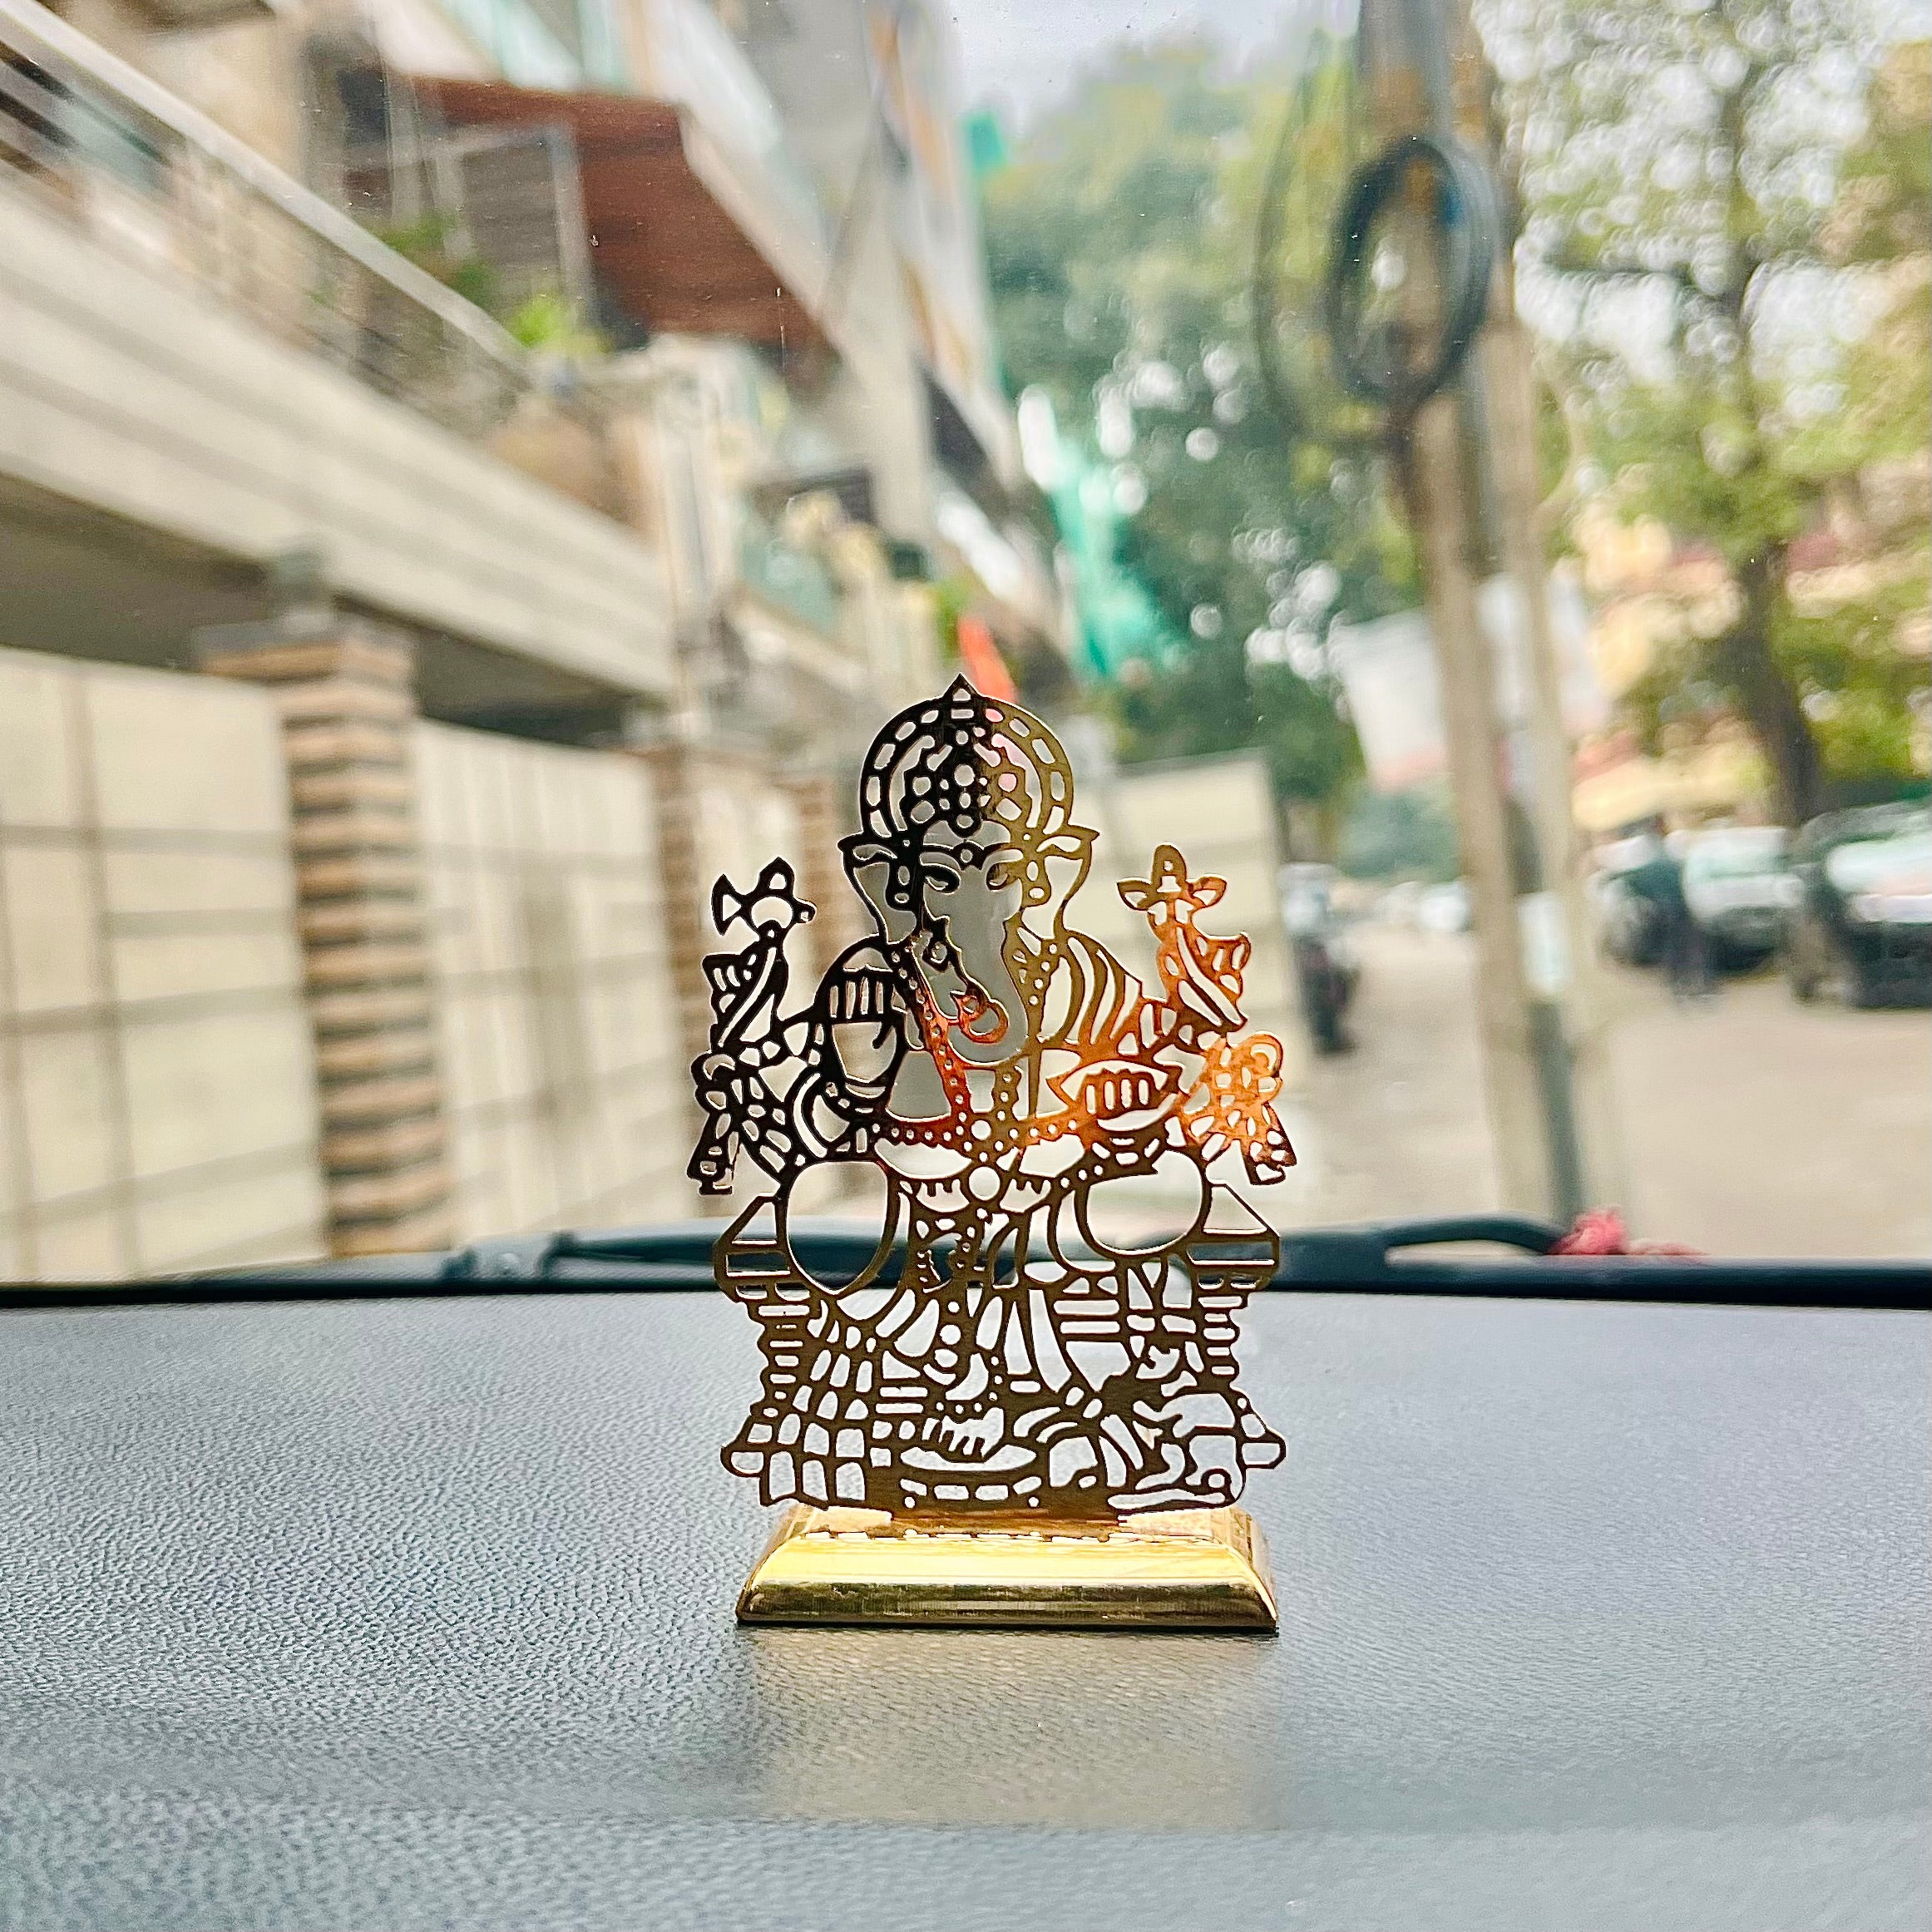 My friend GaneshaA beautifully crafted accessory, perfect for adding blessings and grace to your car's dashboard, serving as a decorative centerpiece on your table, or even adding chHindustanwalefriend Ganesha